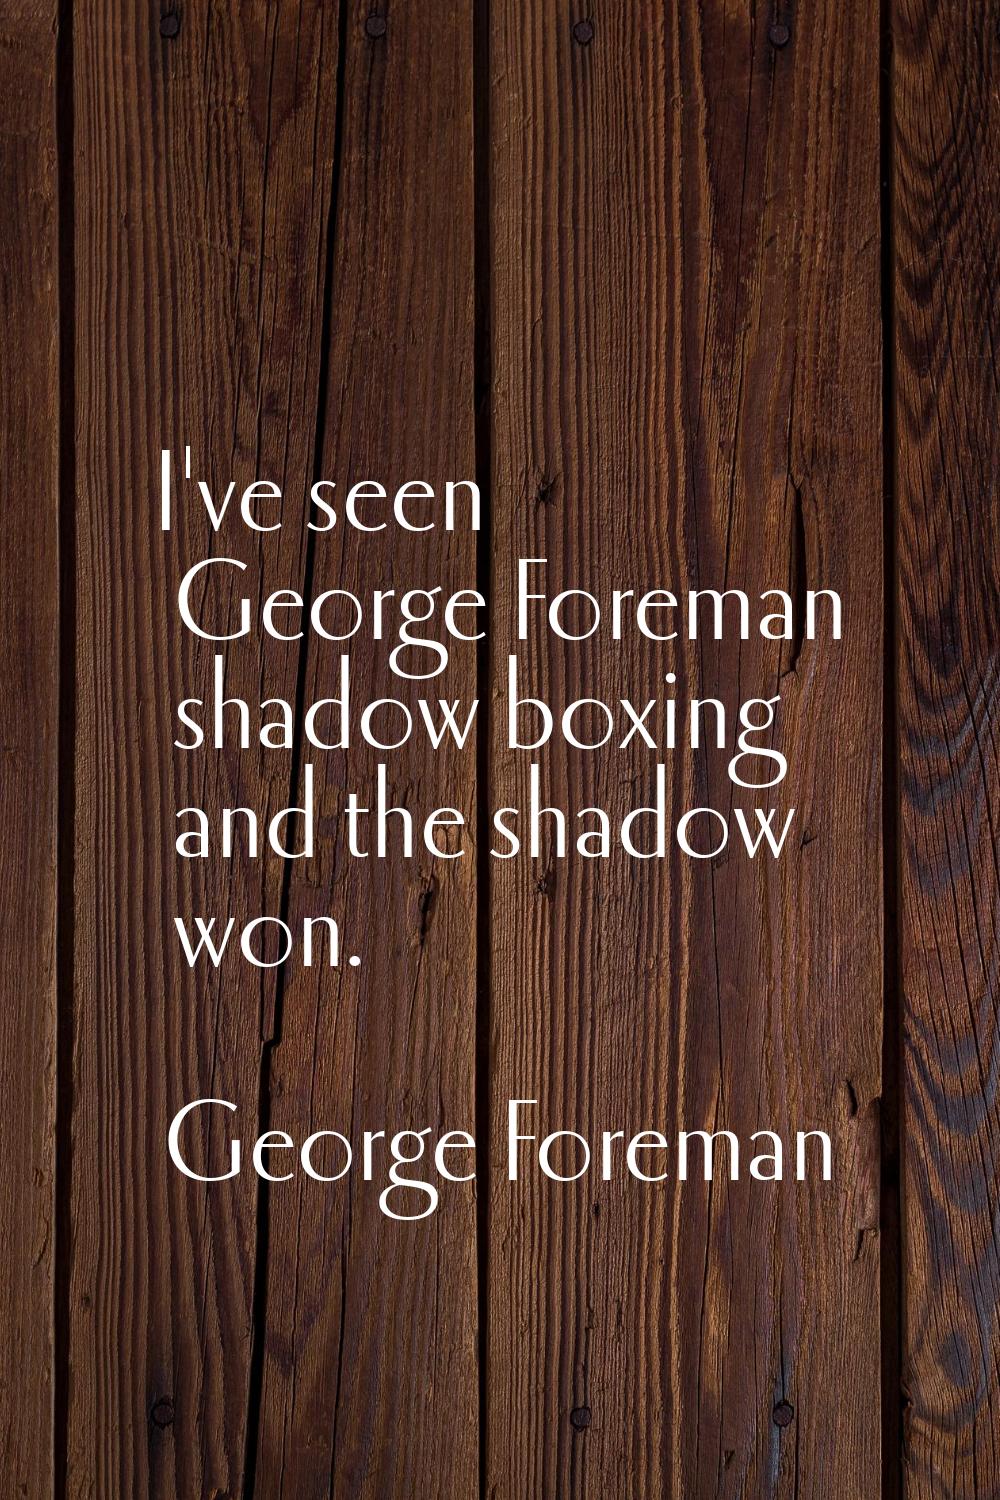 I've seen George Foreman shadow boxing and the shadow won.